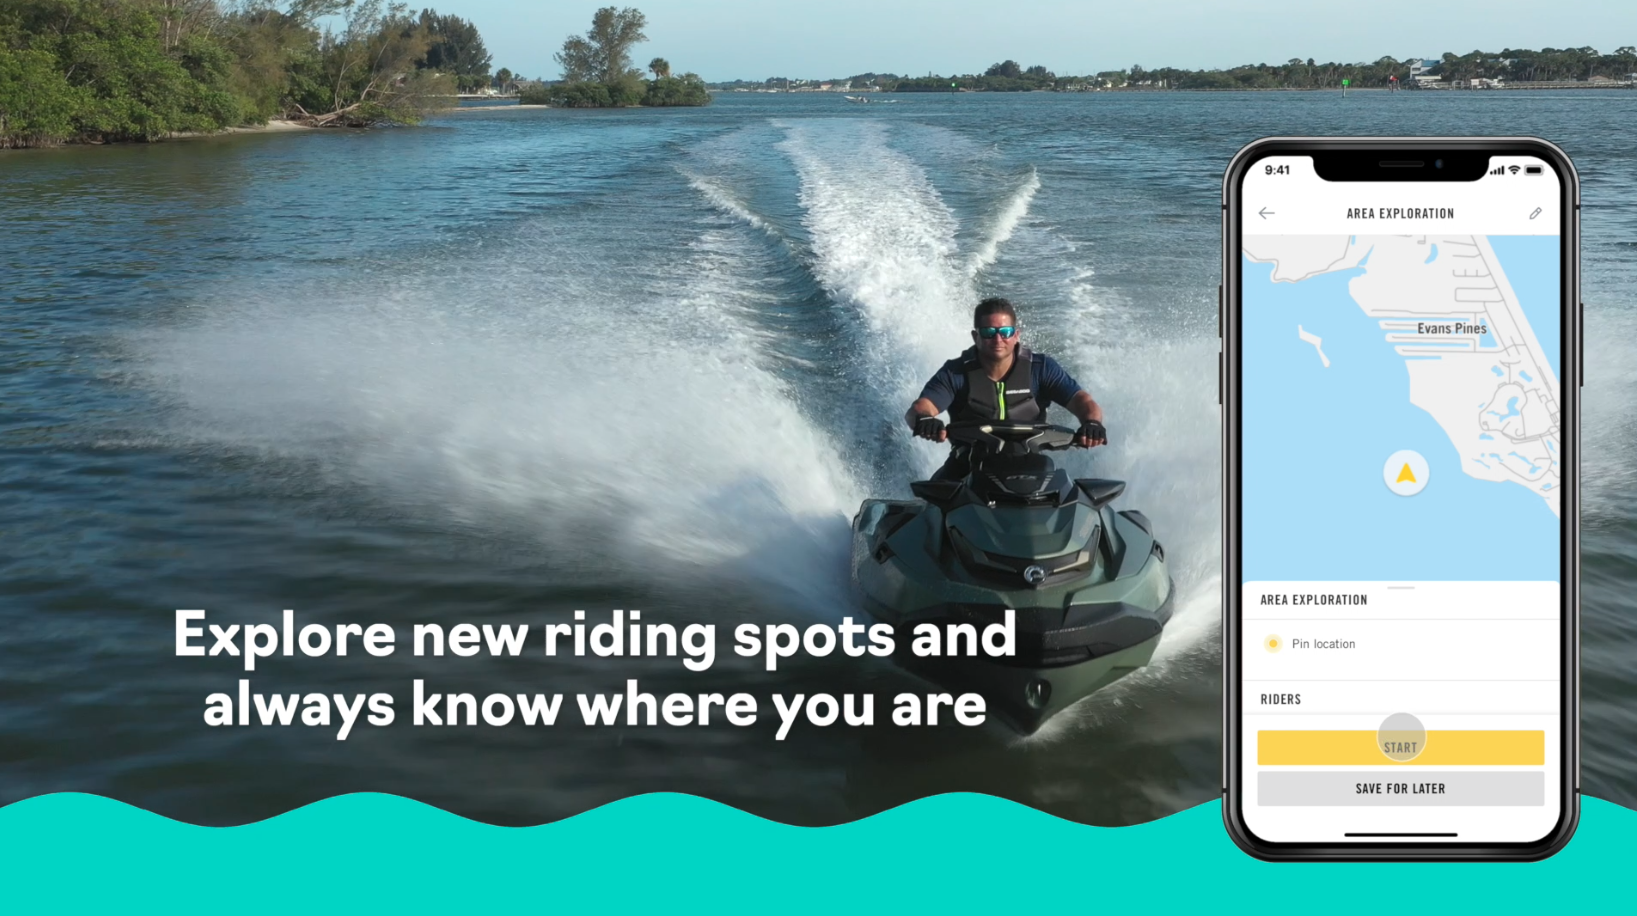 HOW TO CONNECT YOUR PHONE TO YOUR SEA-DOO